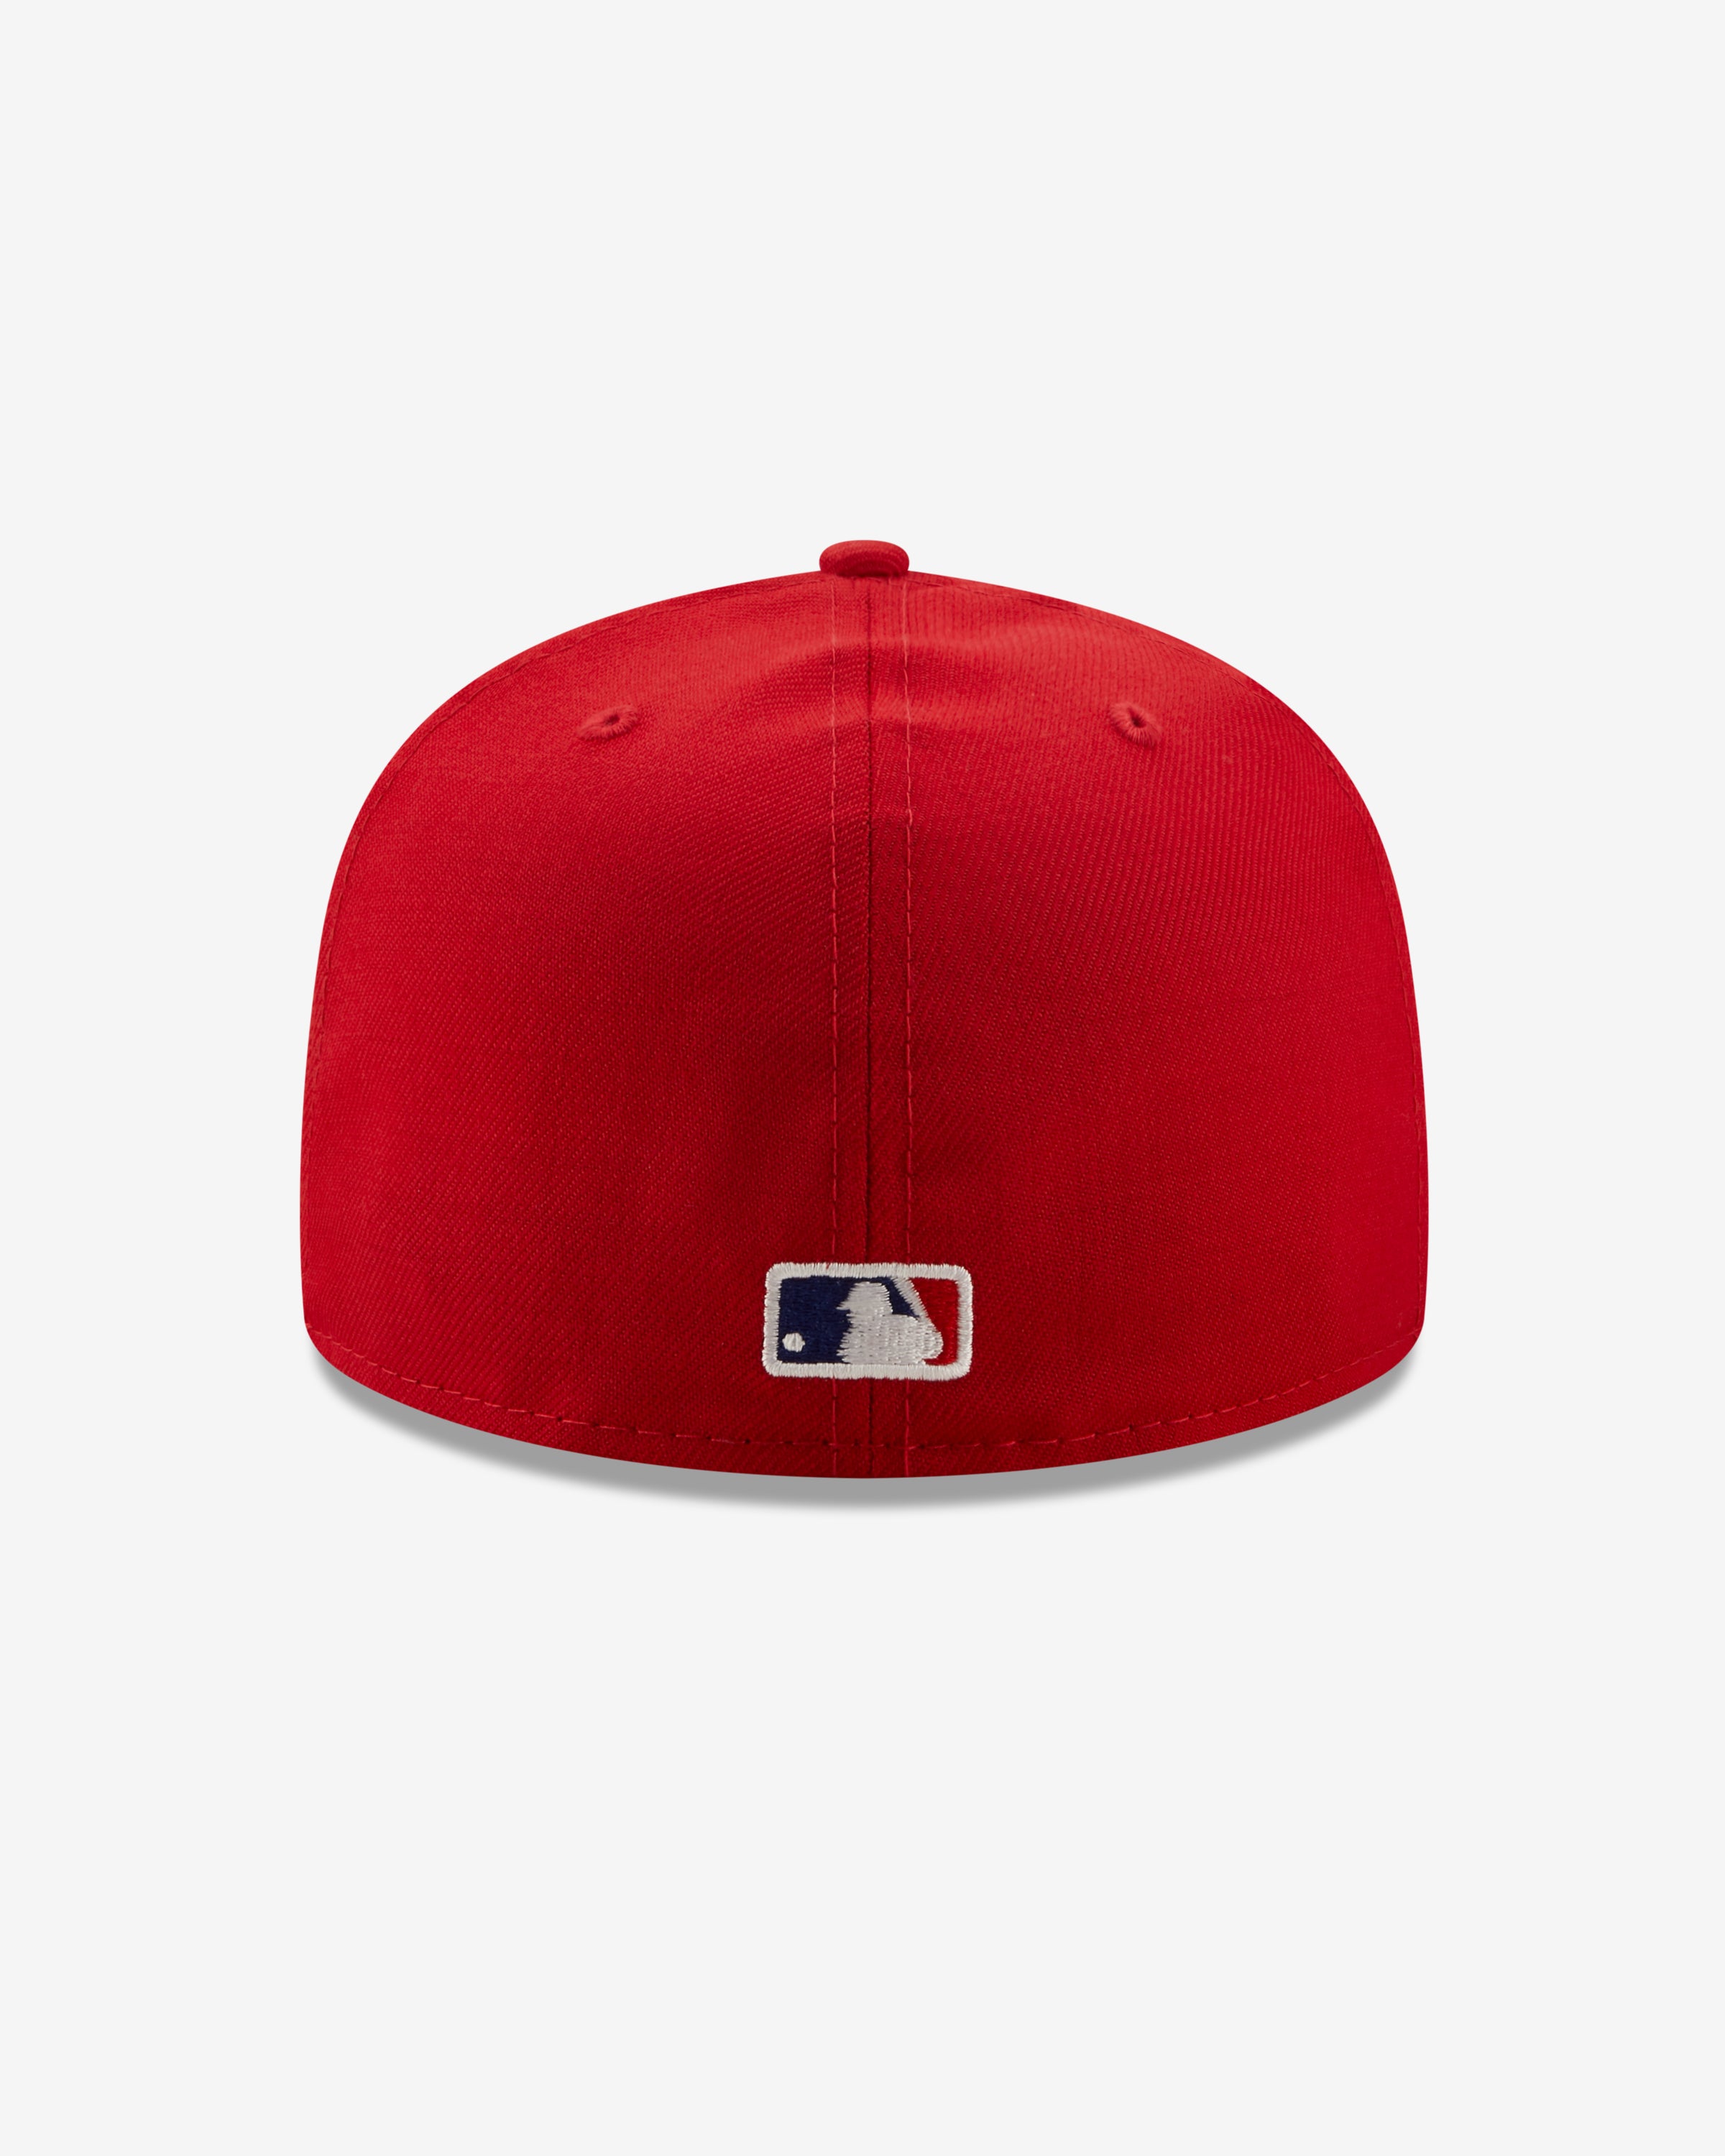 NEW ERA LOGO HISTORY 59FIFTY FITTED - ST. LOUIS CARDINALS (1982)